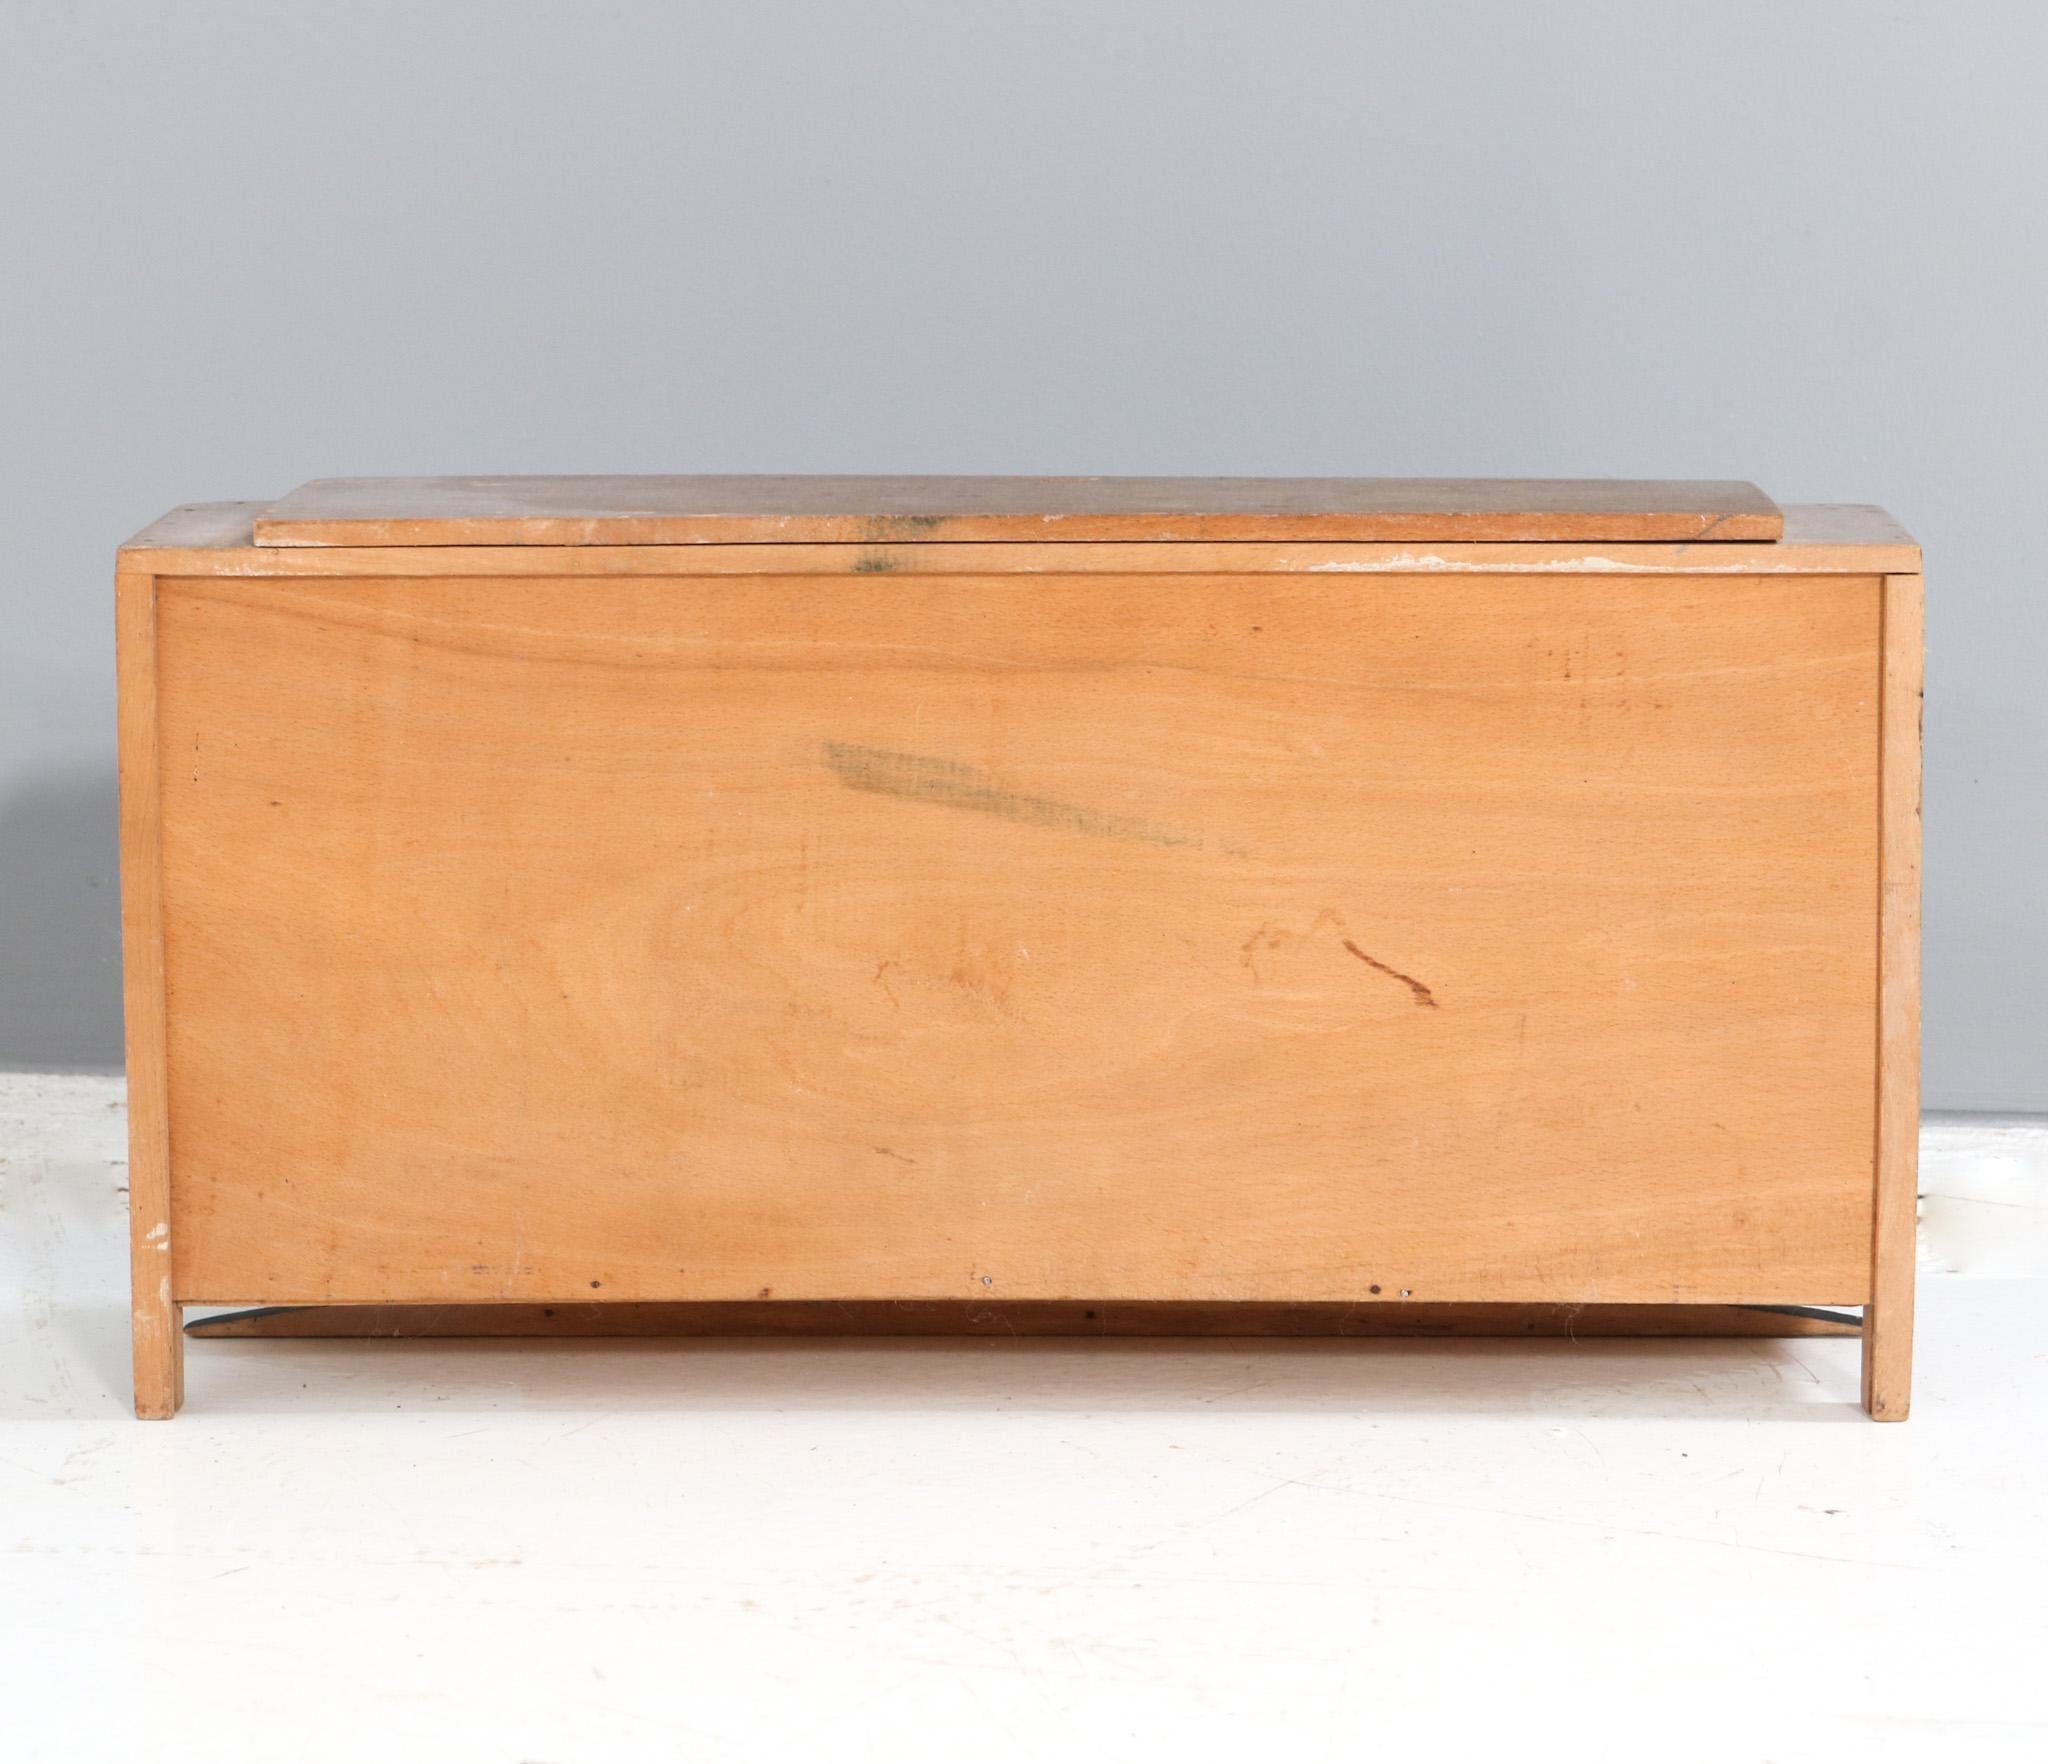 Lacquered Plywood Art Deco Modernist Children's Furniture Credenza, 1930s For Sale 1